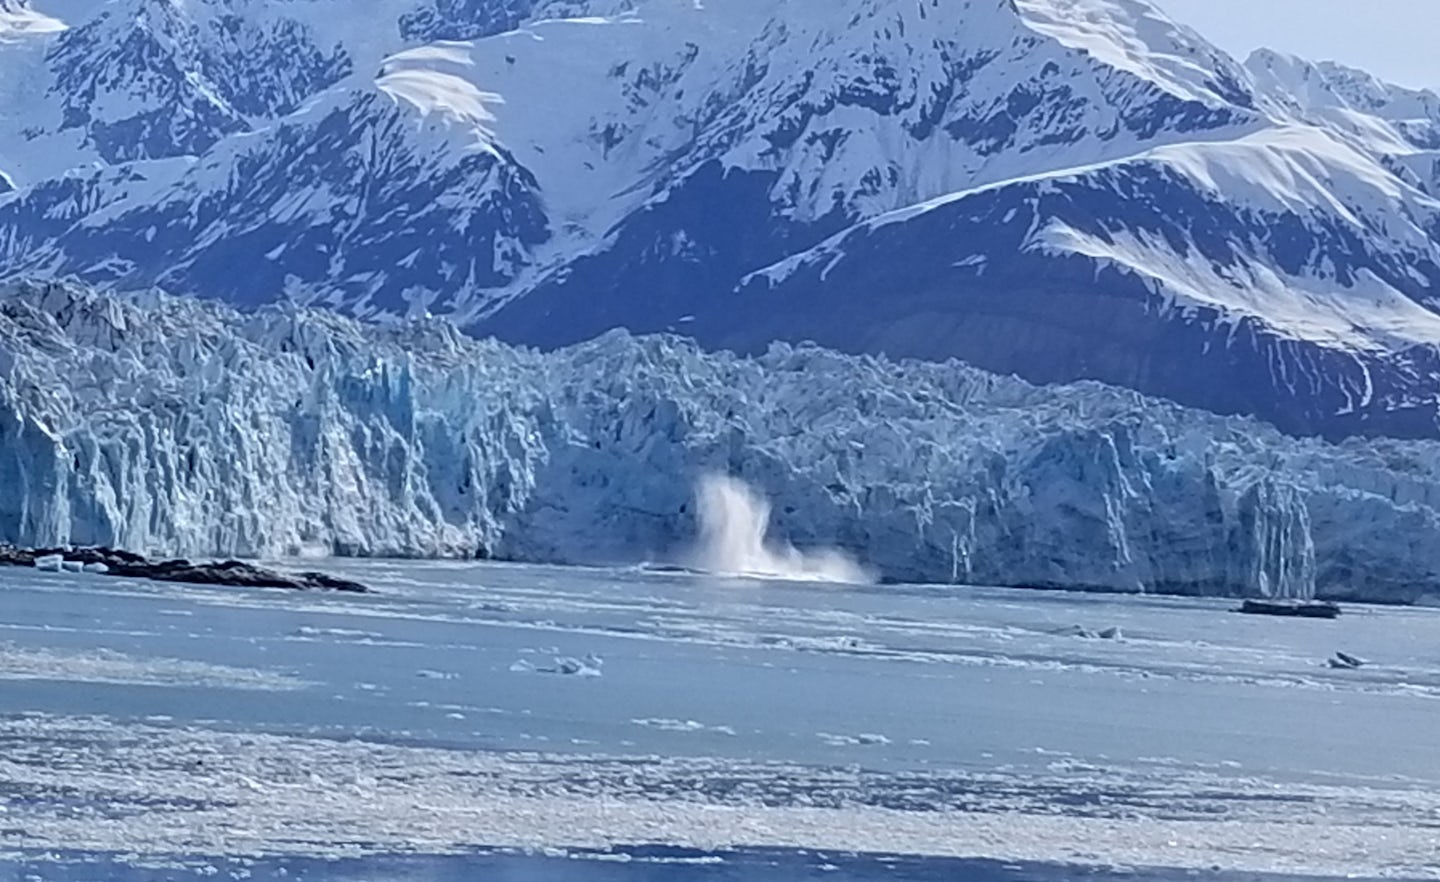 Ice actively falling from the Hubbard Glacier viewed from the helipad of th